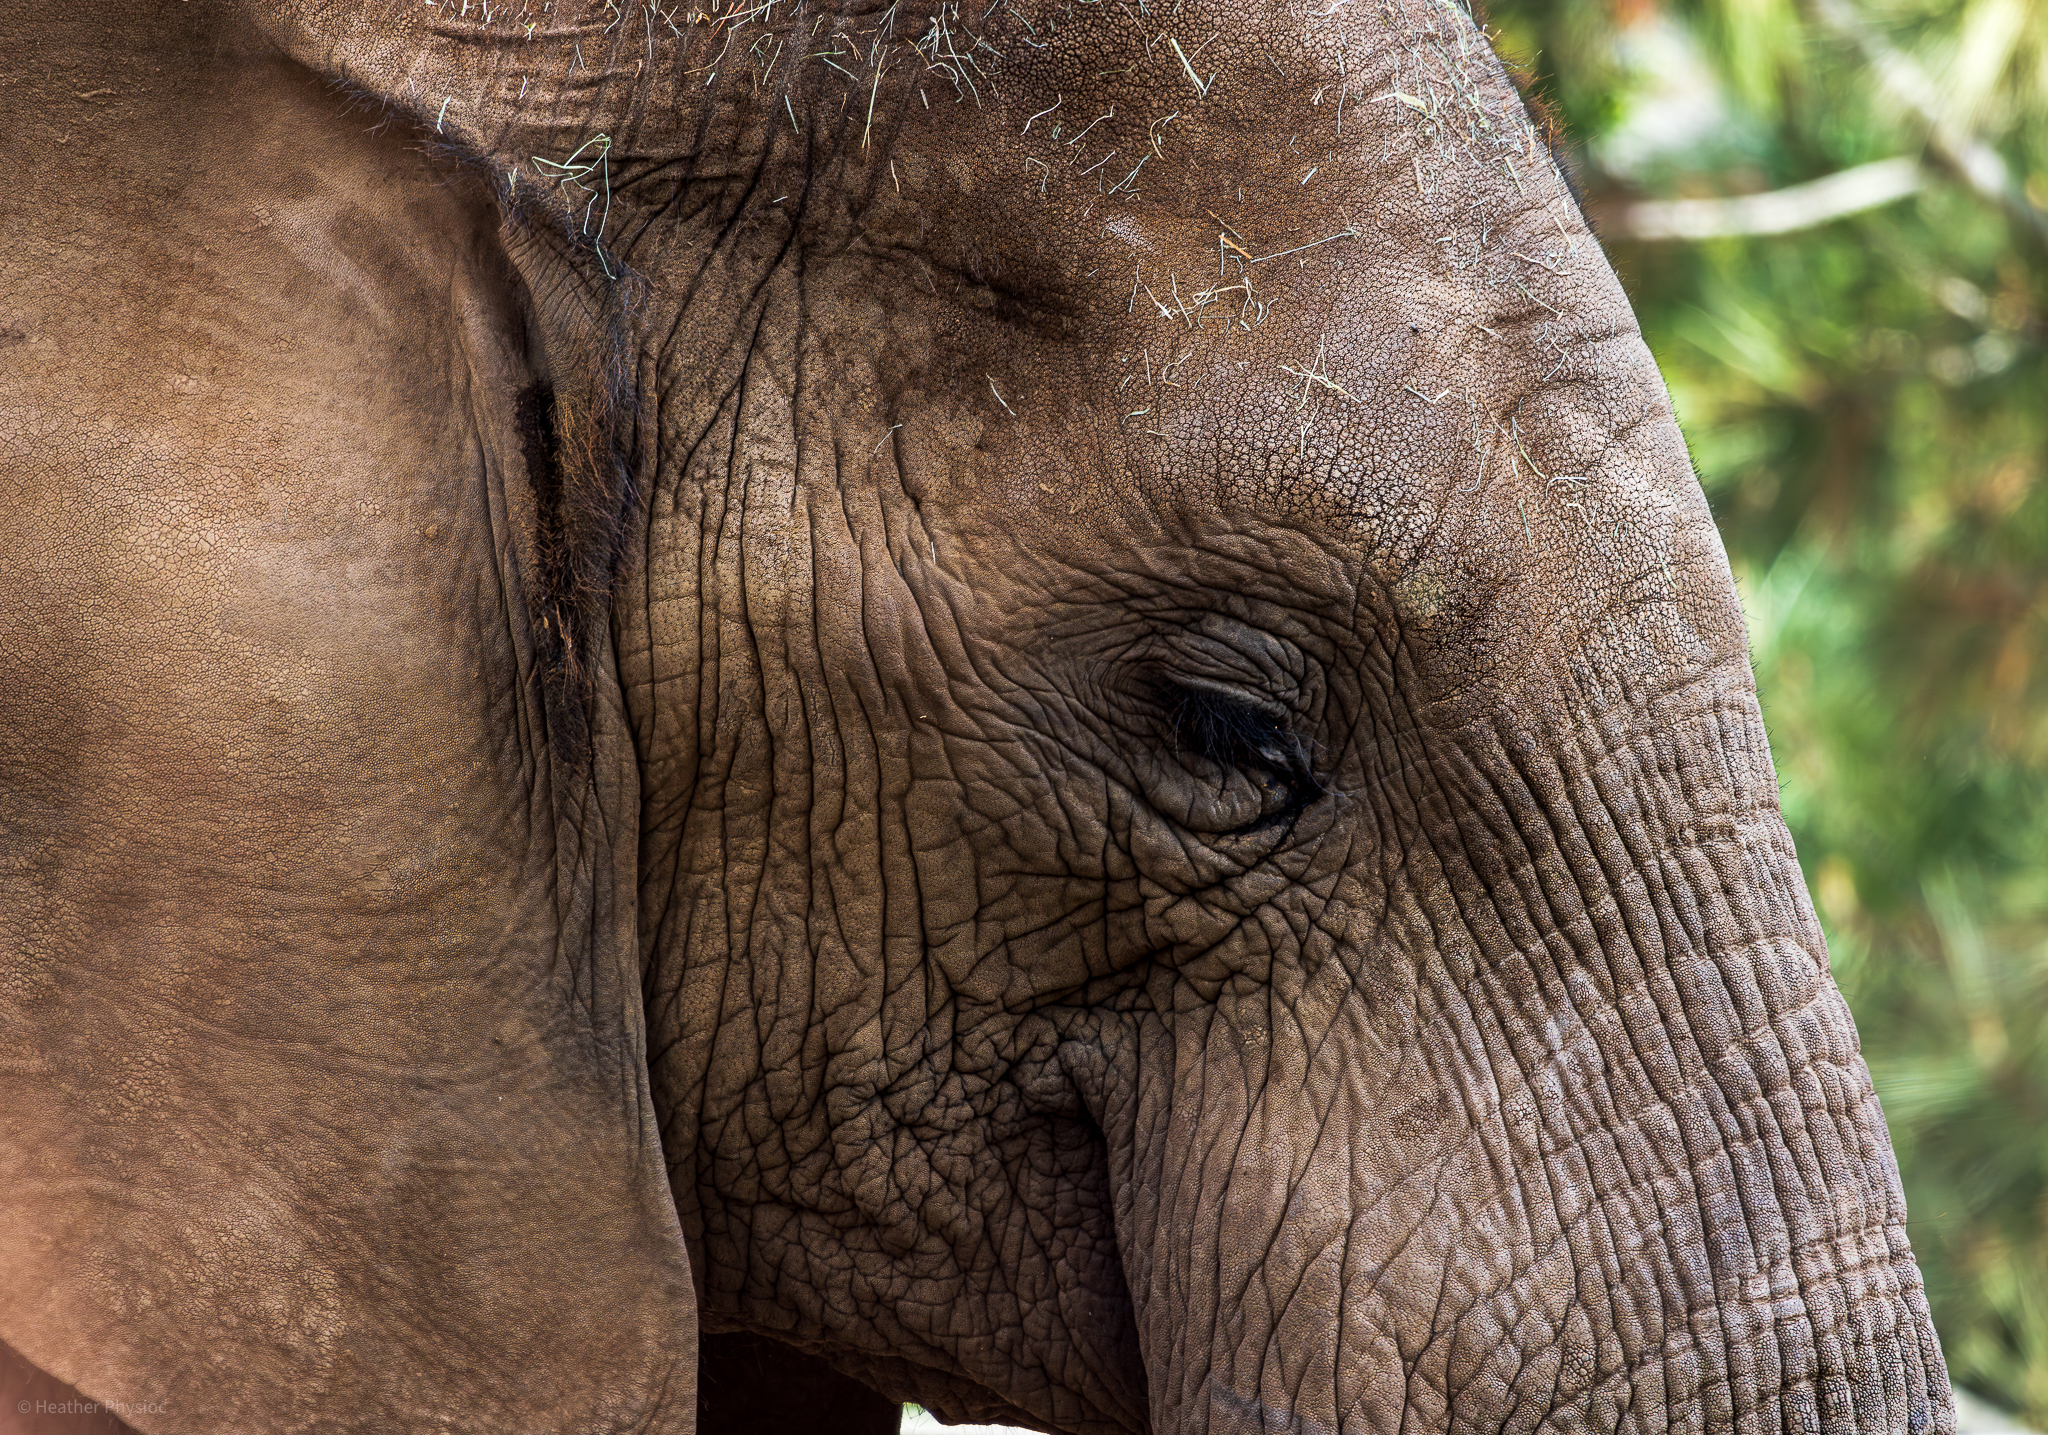 Portrait of an elephant's face at the San Diego Zoo